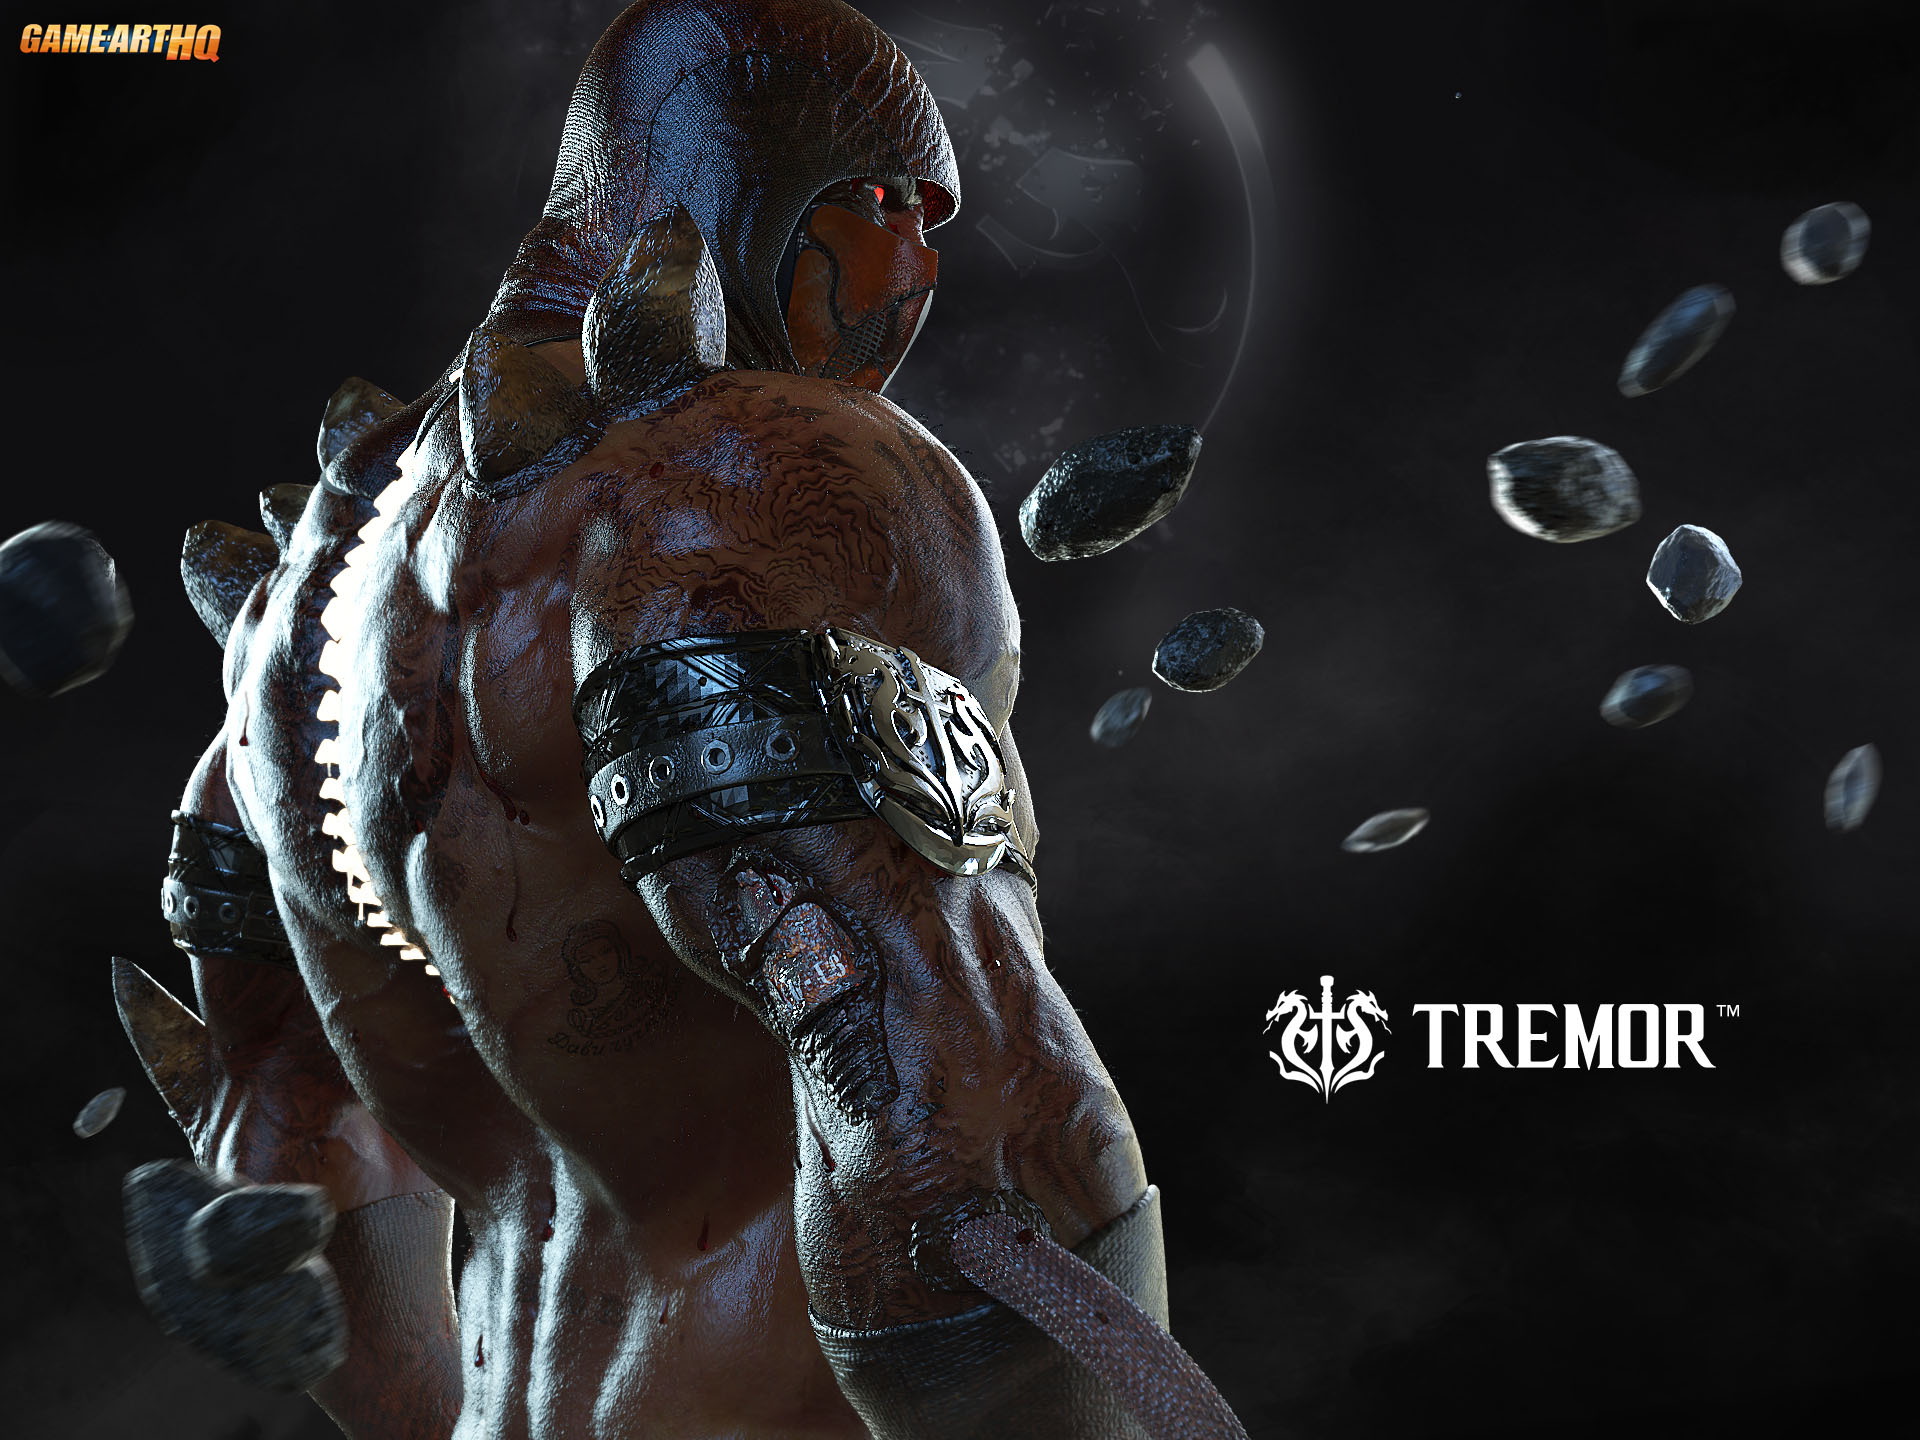 Will Tremor be the next Mortal Kombat X Character